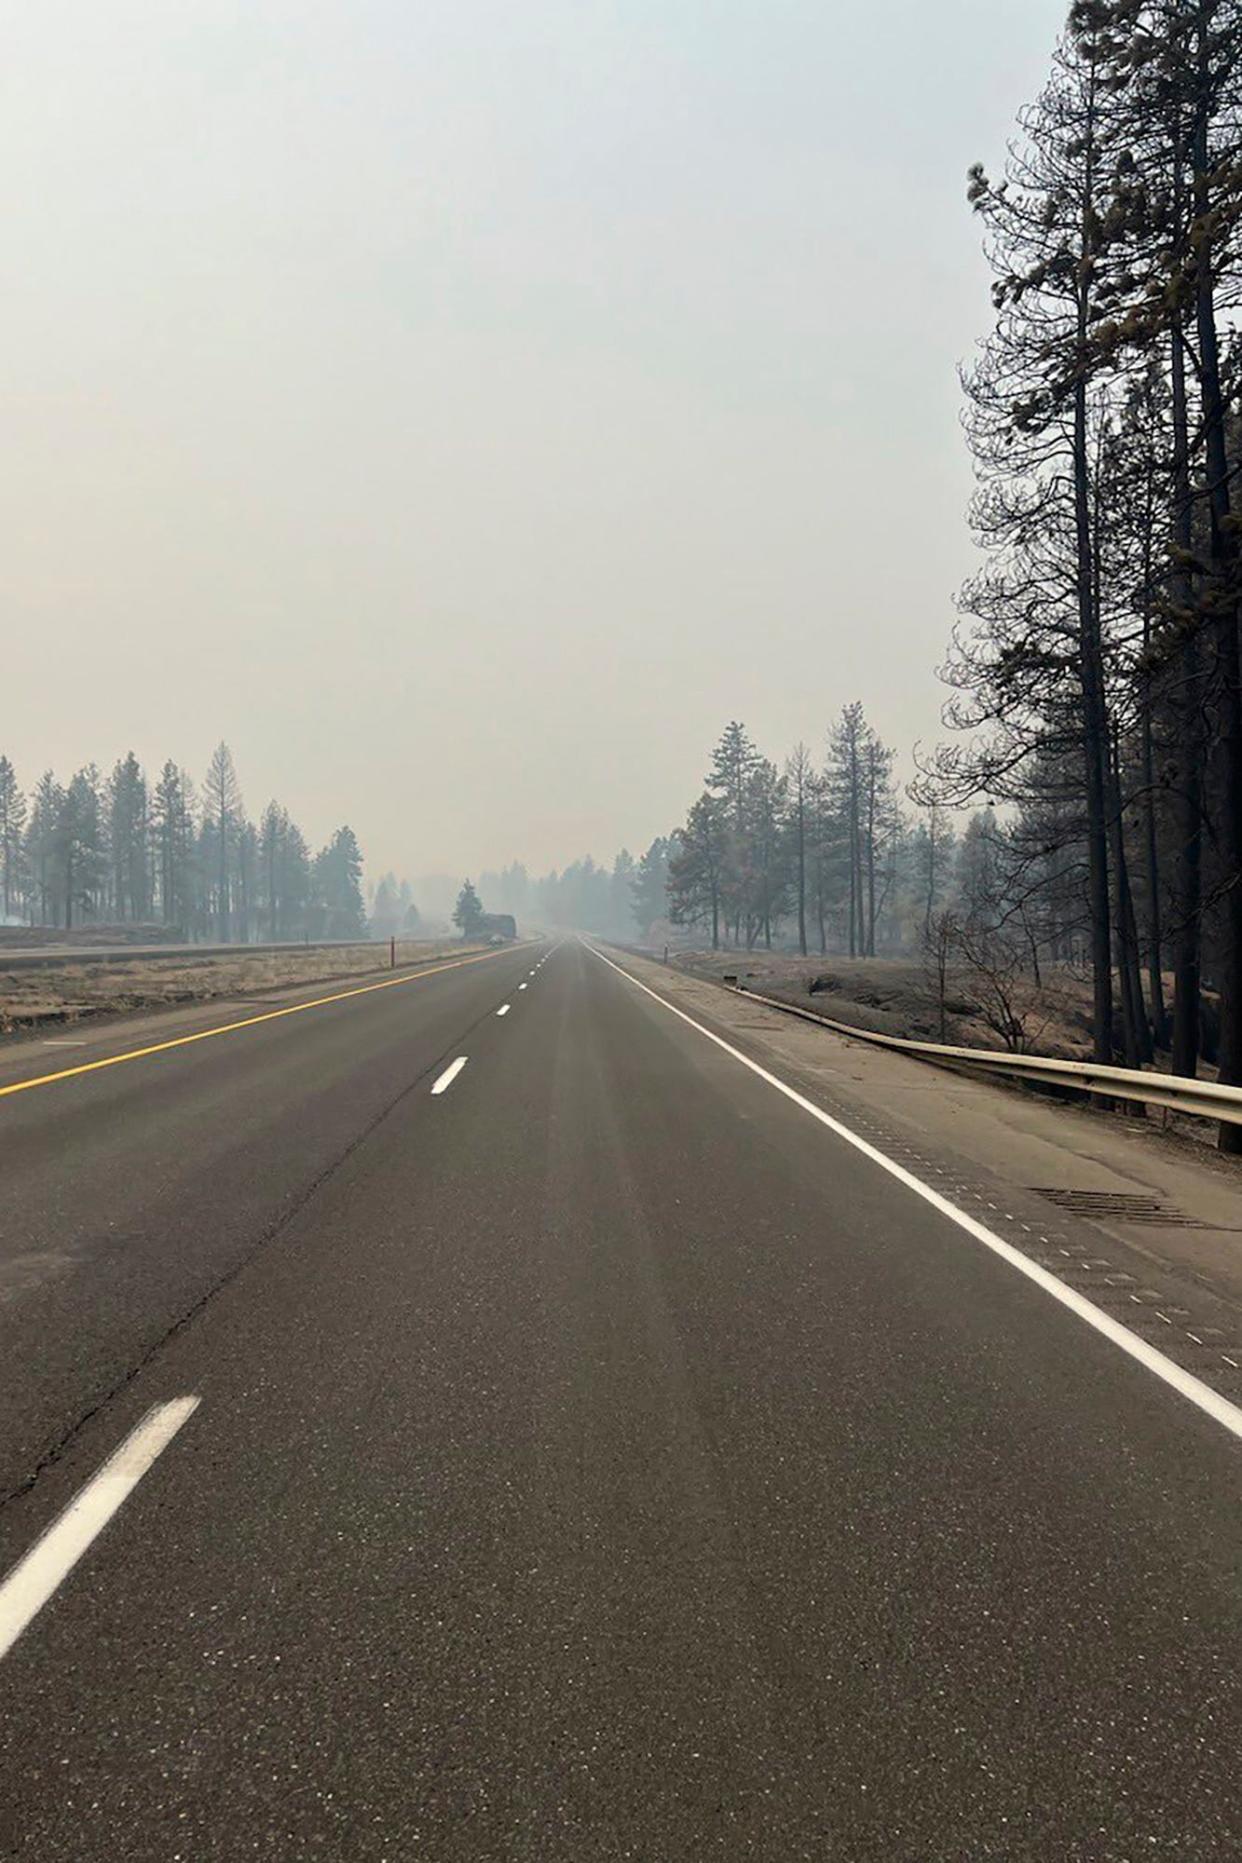 This photo provided by the Washington State of Transportation smoke from wildfires fill the sky at Salnave/SR 902 interchange in Spokane County on Saturday. A fast-moving wildfire has destroyed at least 185 structures, closed a major highway and left one person dead.